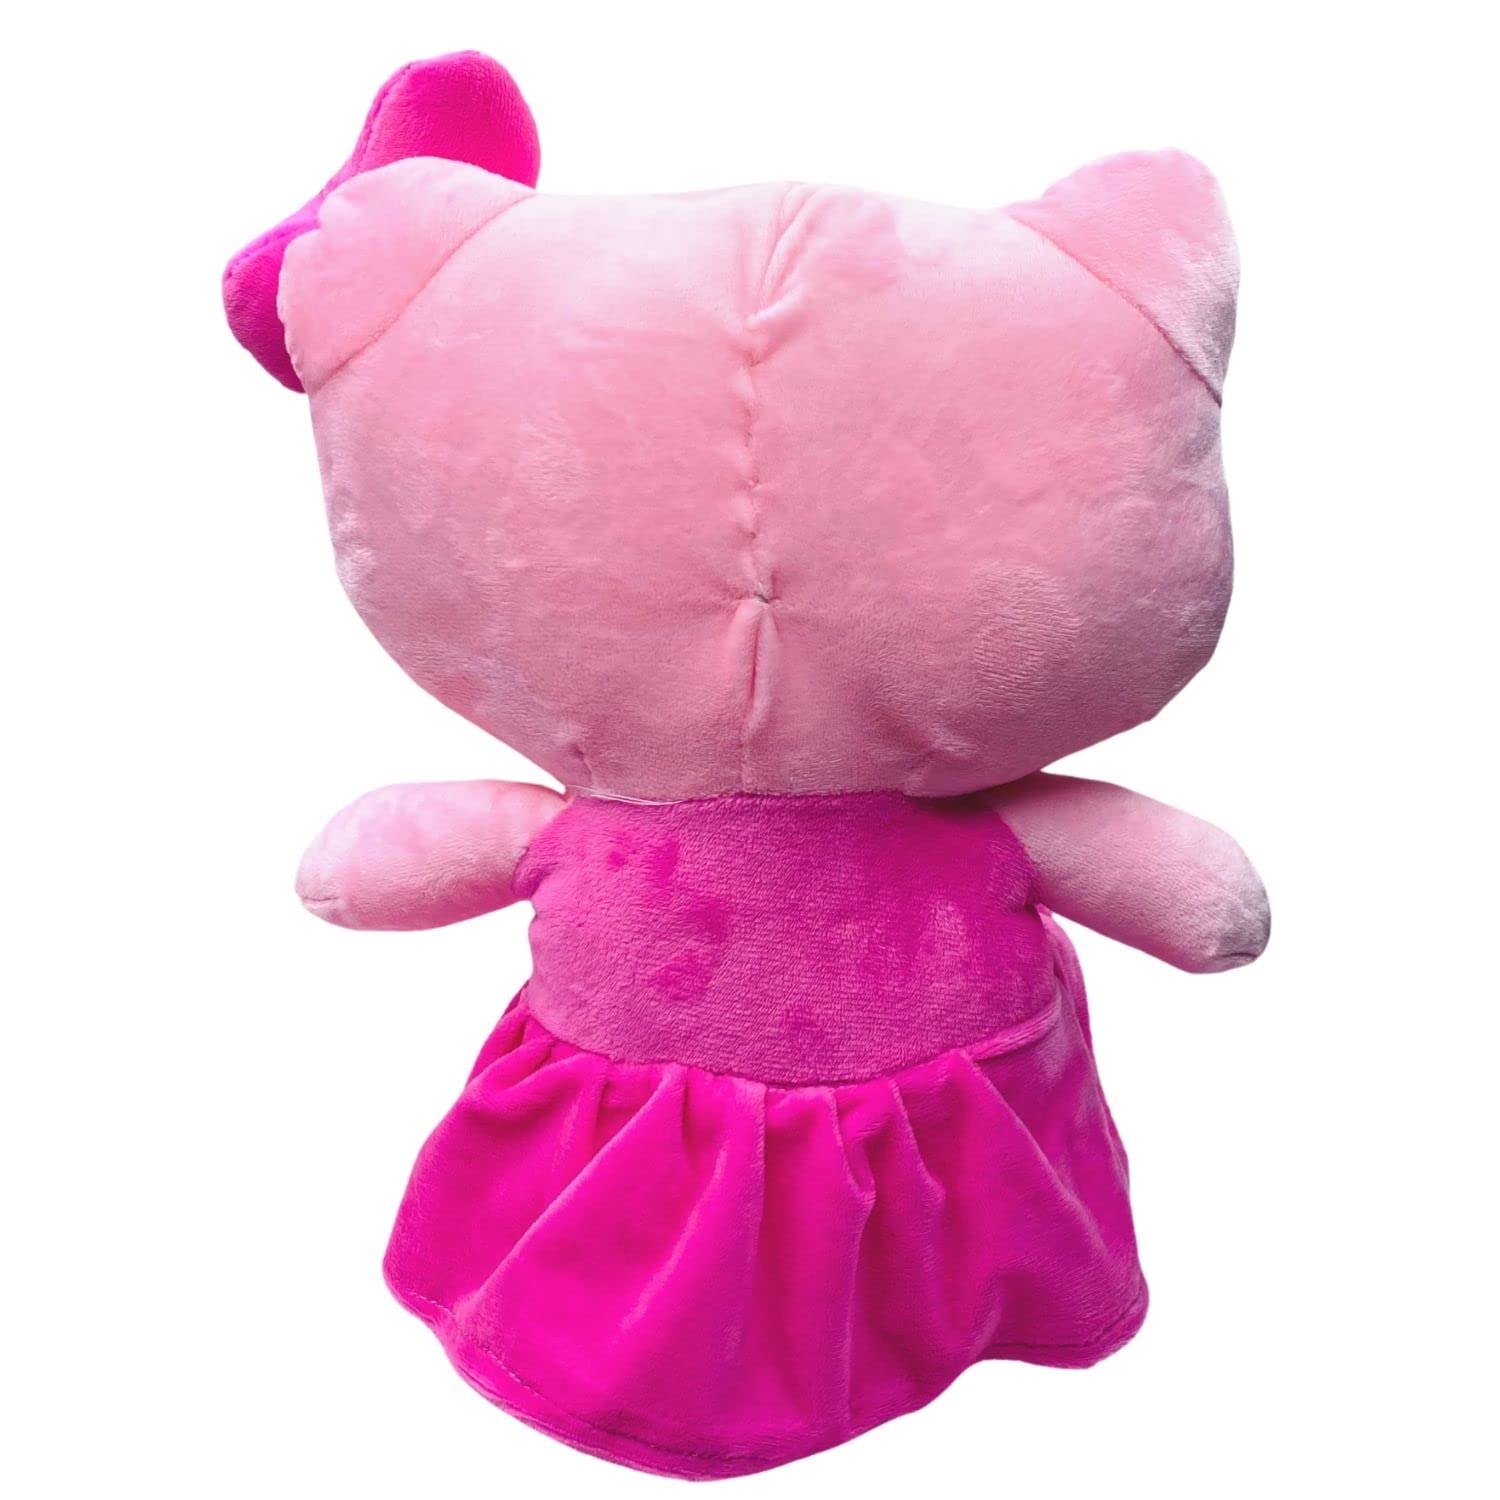 Kids Mandi soft toys for sale, colorful and playful.